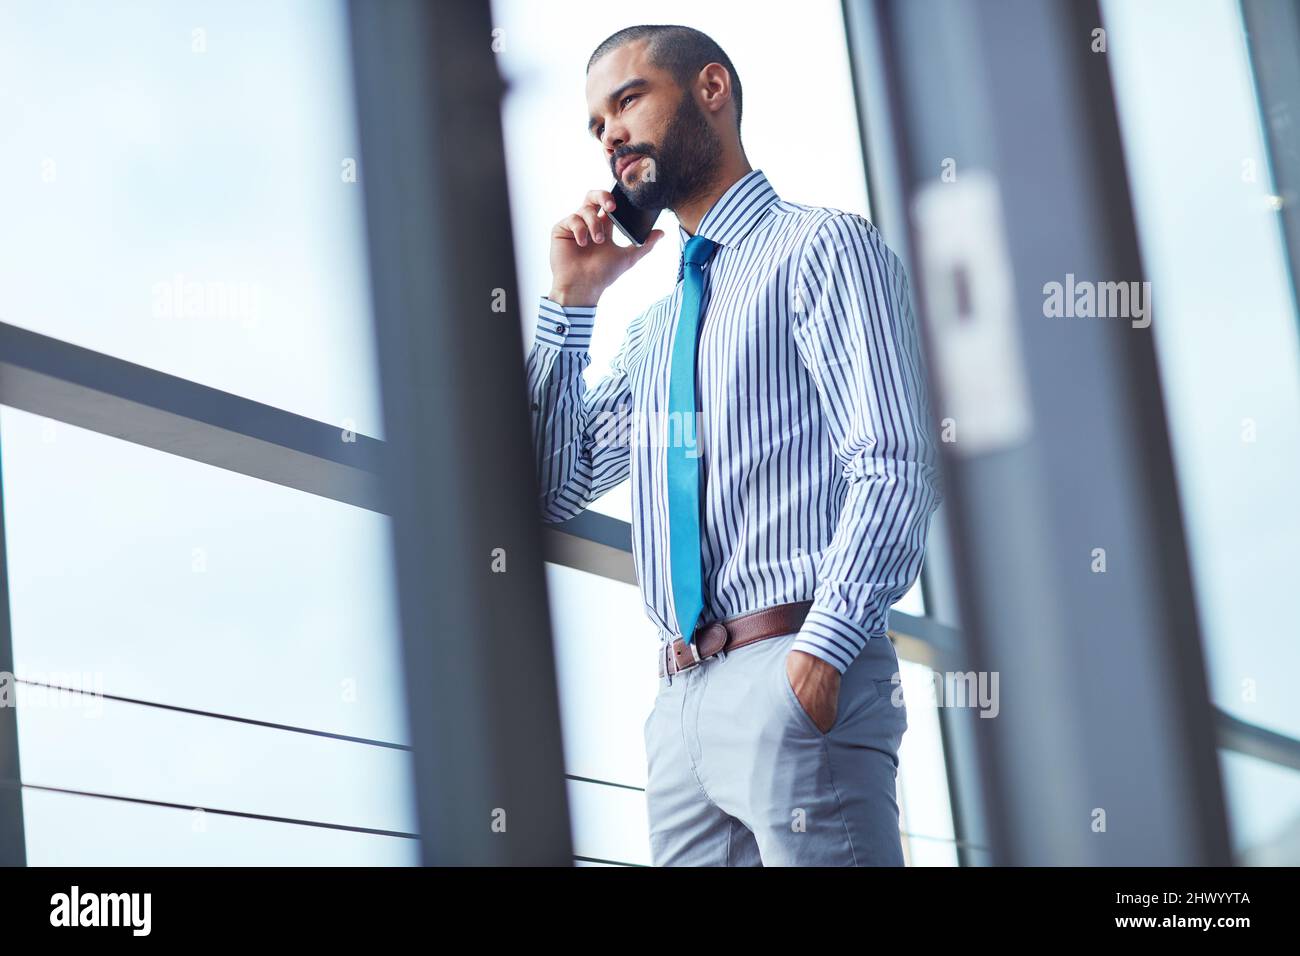 Connecting with a client. Shot of a young businessman talking on a phone at the office. Stock Photo